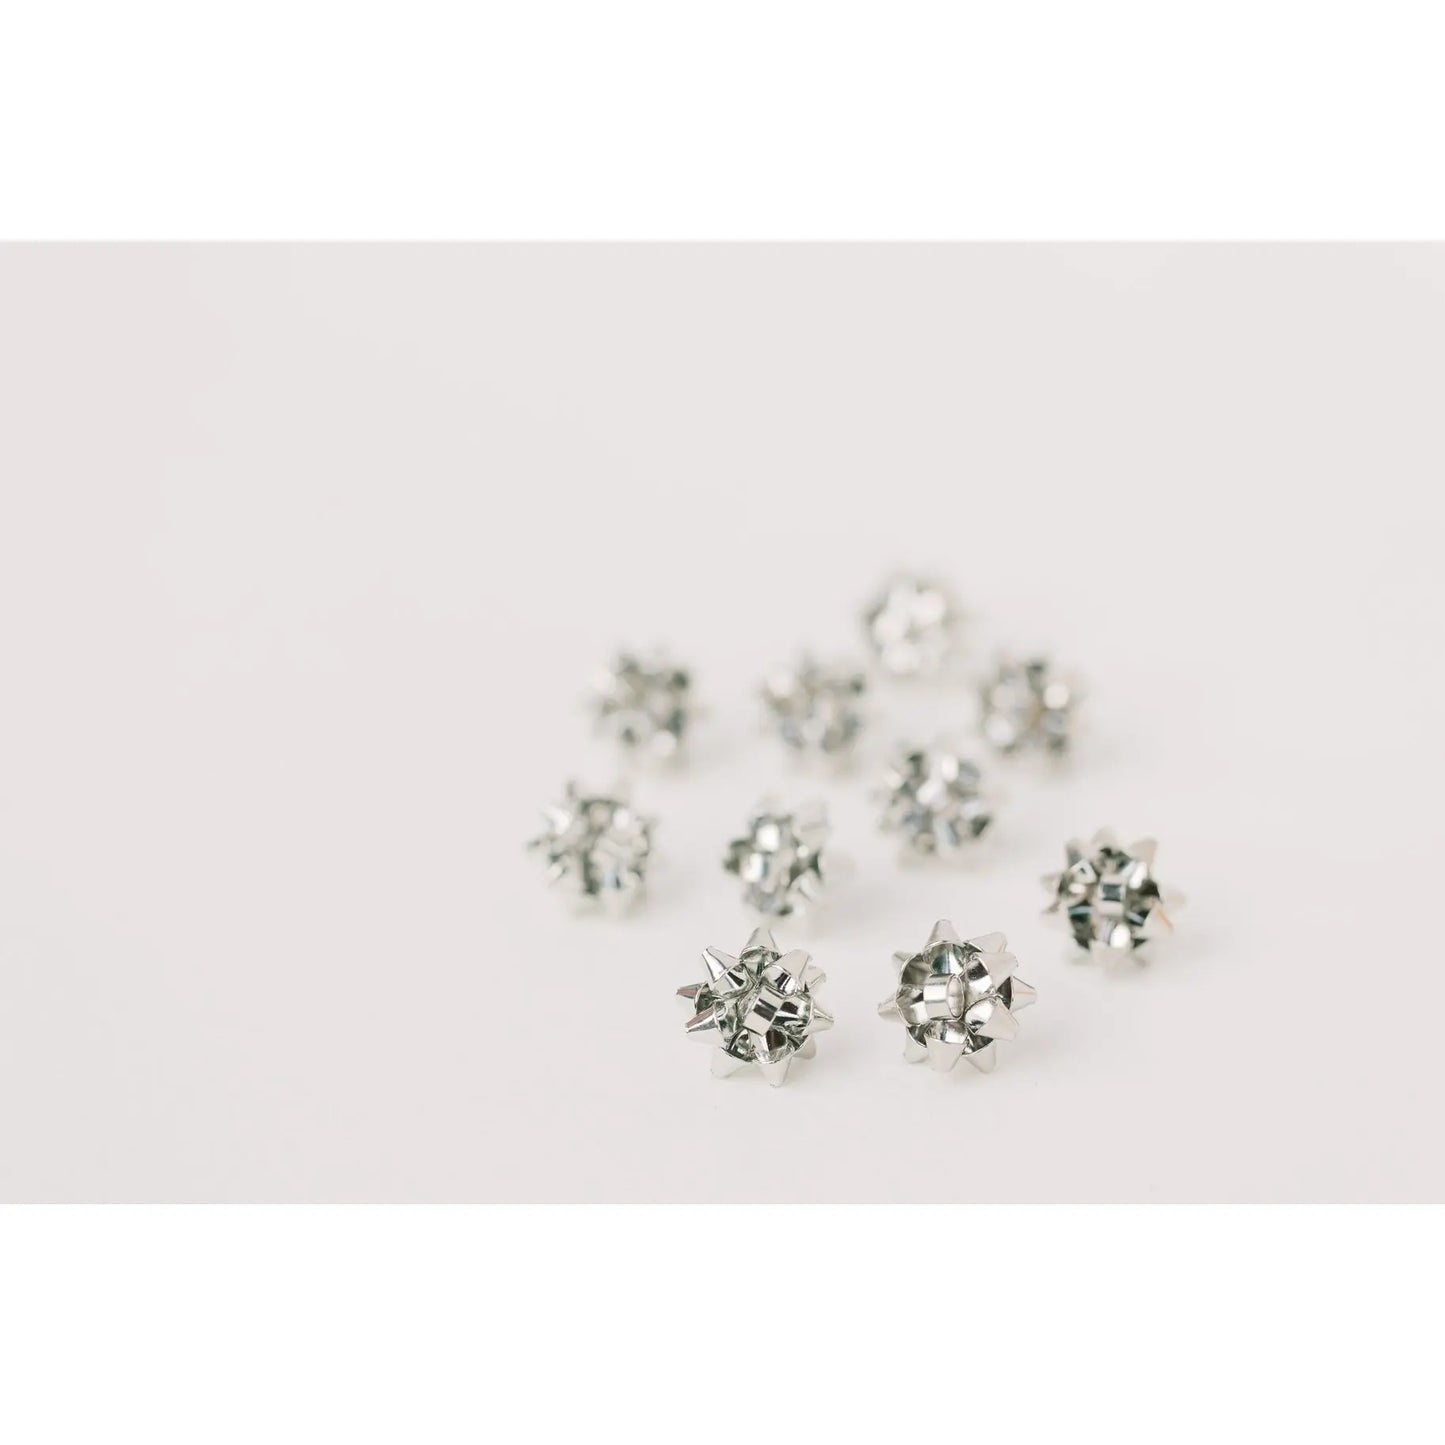 The Tiny Details Christmas Present Bow Stud Earrings